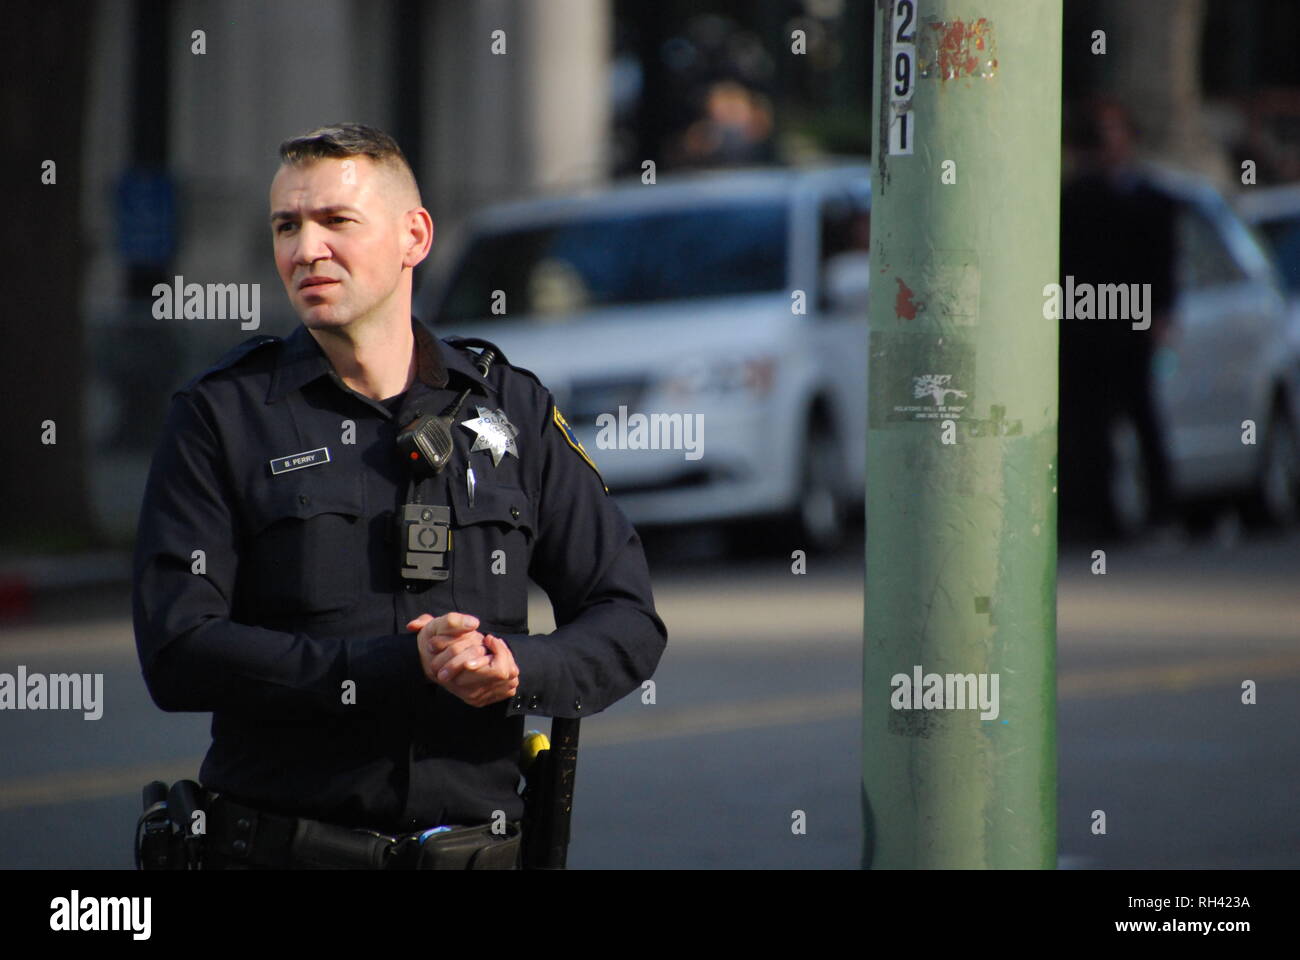 Oakland police Officer Brandon Perry providing security outside a Kamala Harris for President rally in downtown Oakland on Jan. 27, 2019. Stock Photo